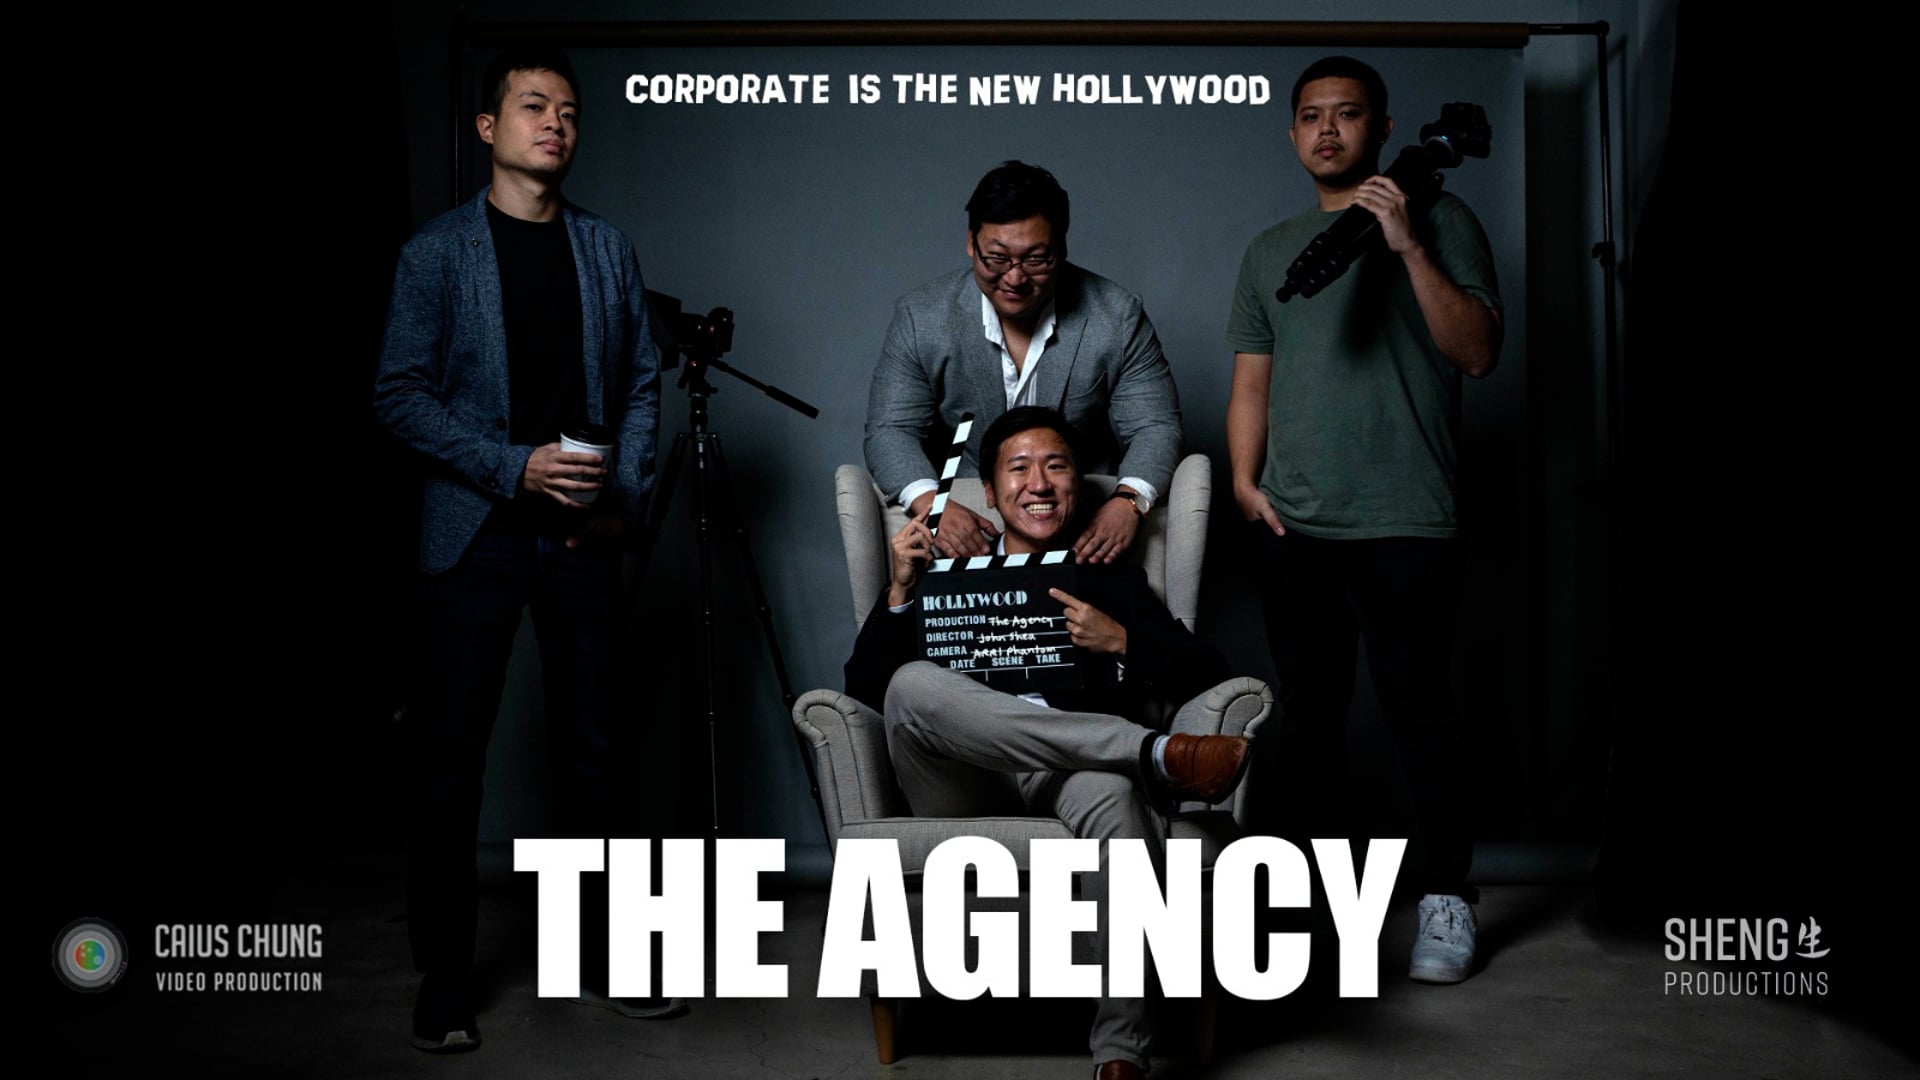 The Agency - Marketing Day